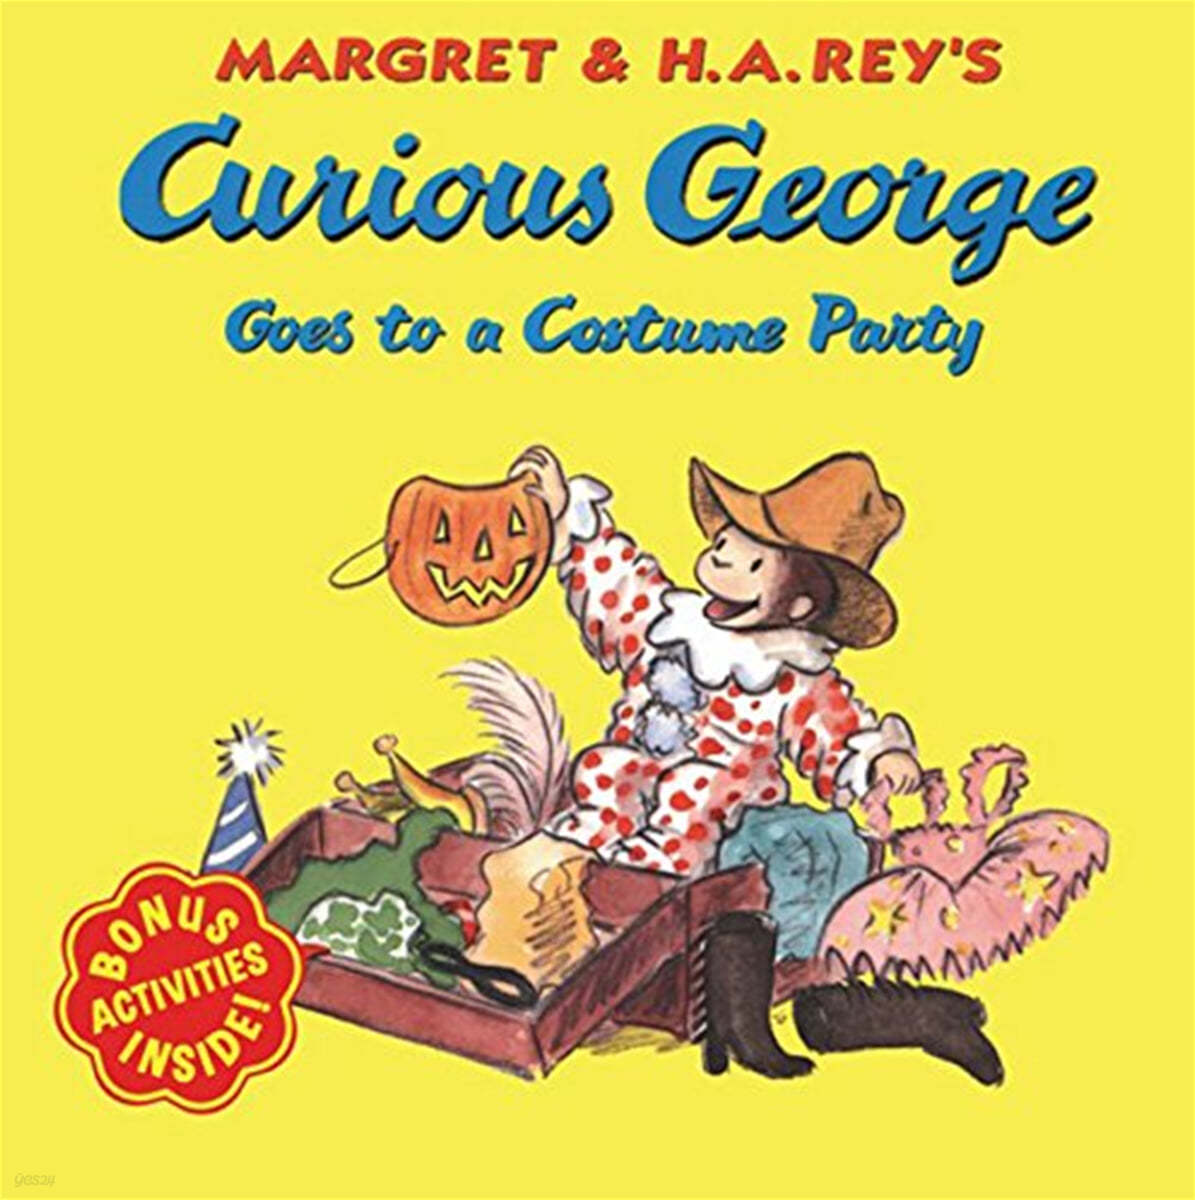 Curious George Goes to a Costume Party (Curious George)